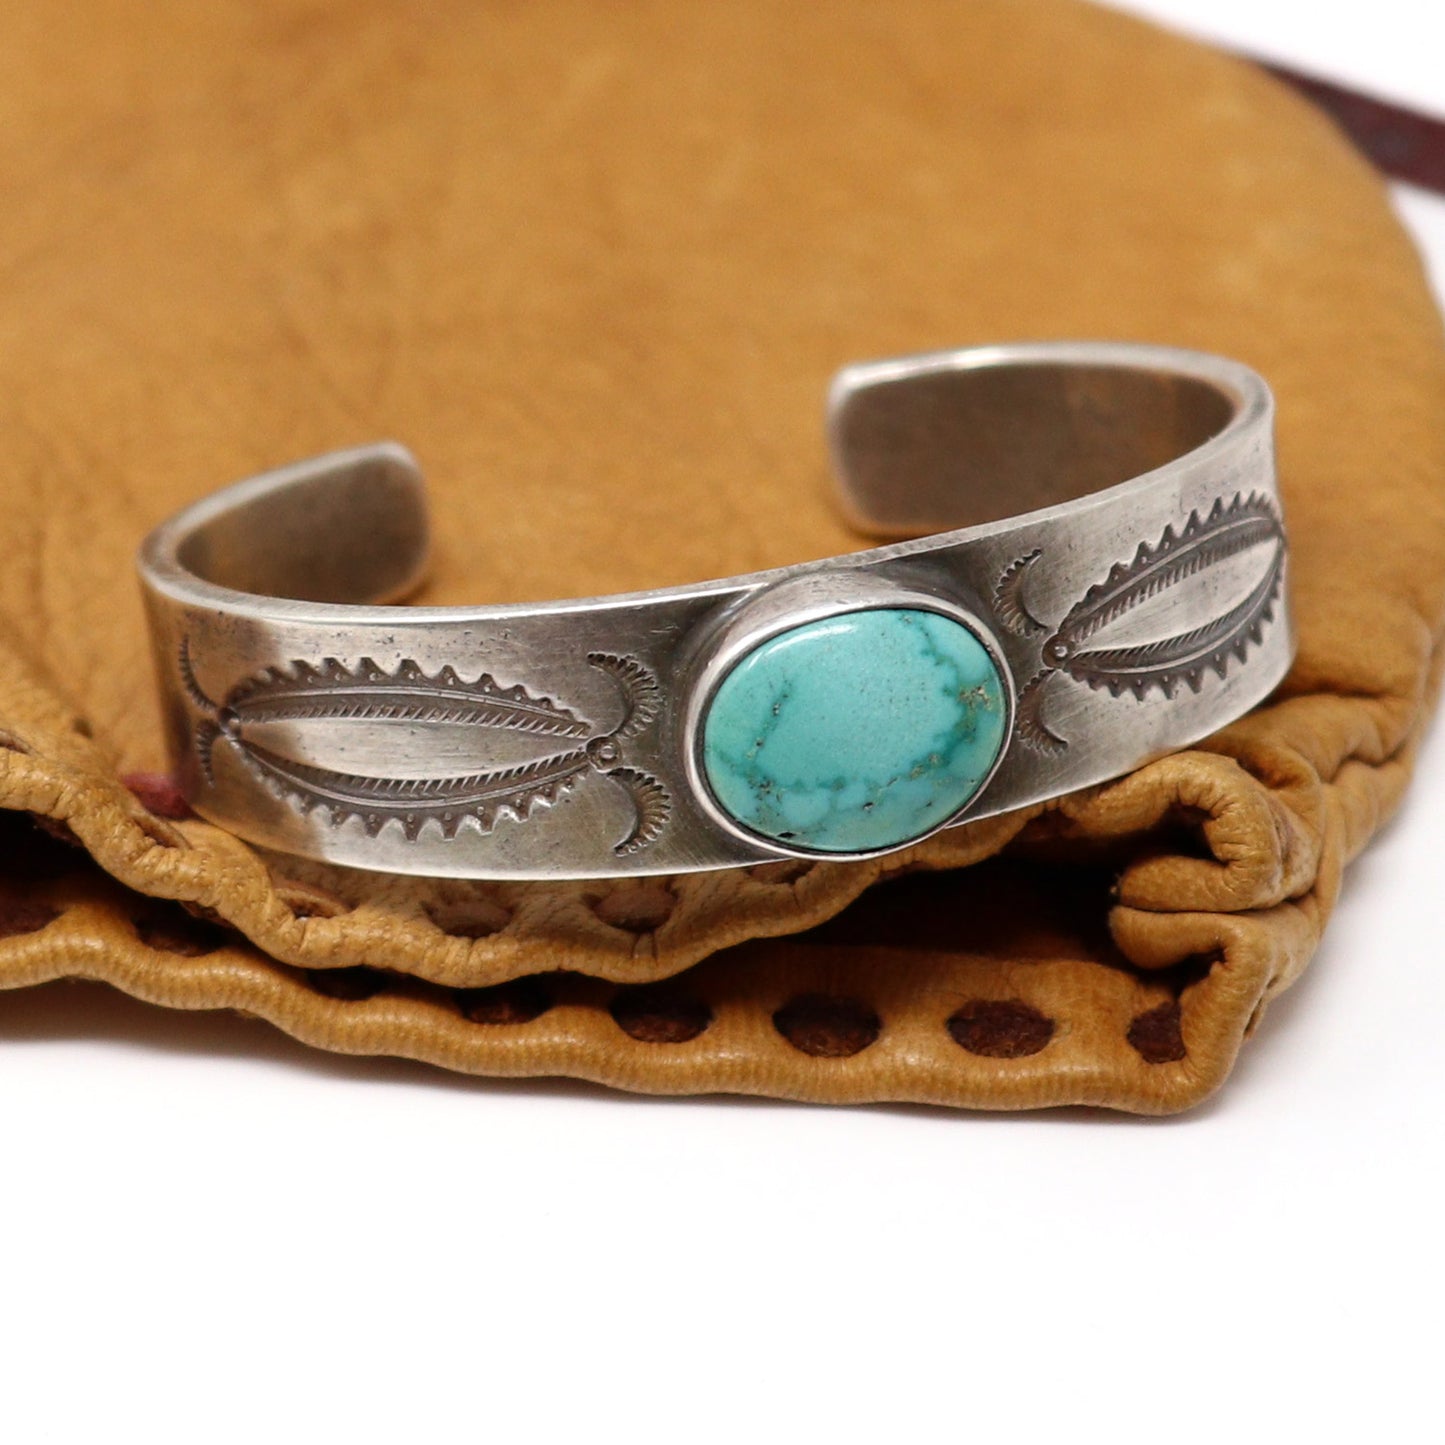 Load image into Gallery viewer, Hand Hammered Bracelet by Jesse Robbins
